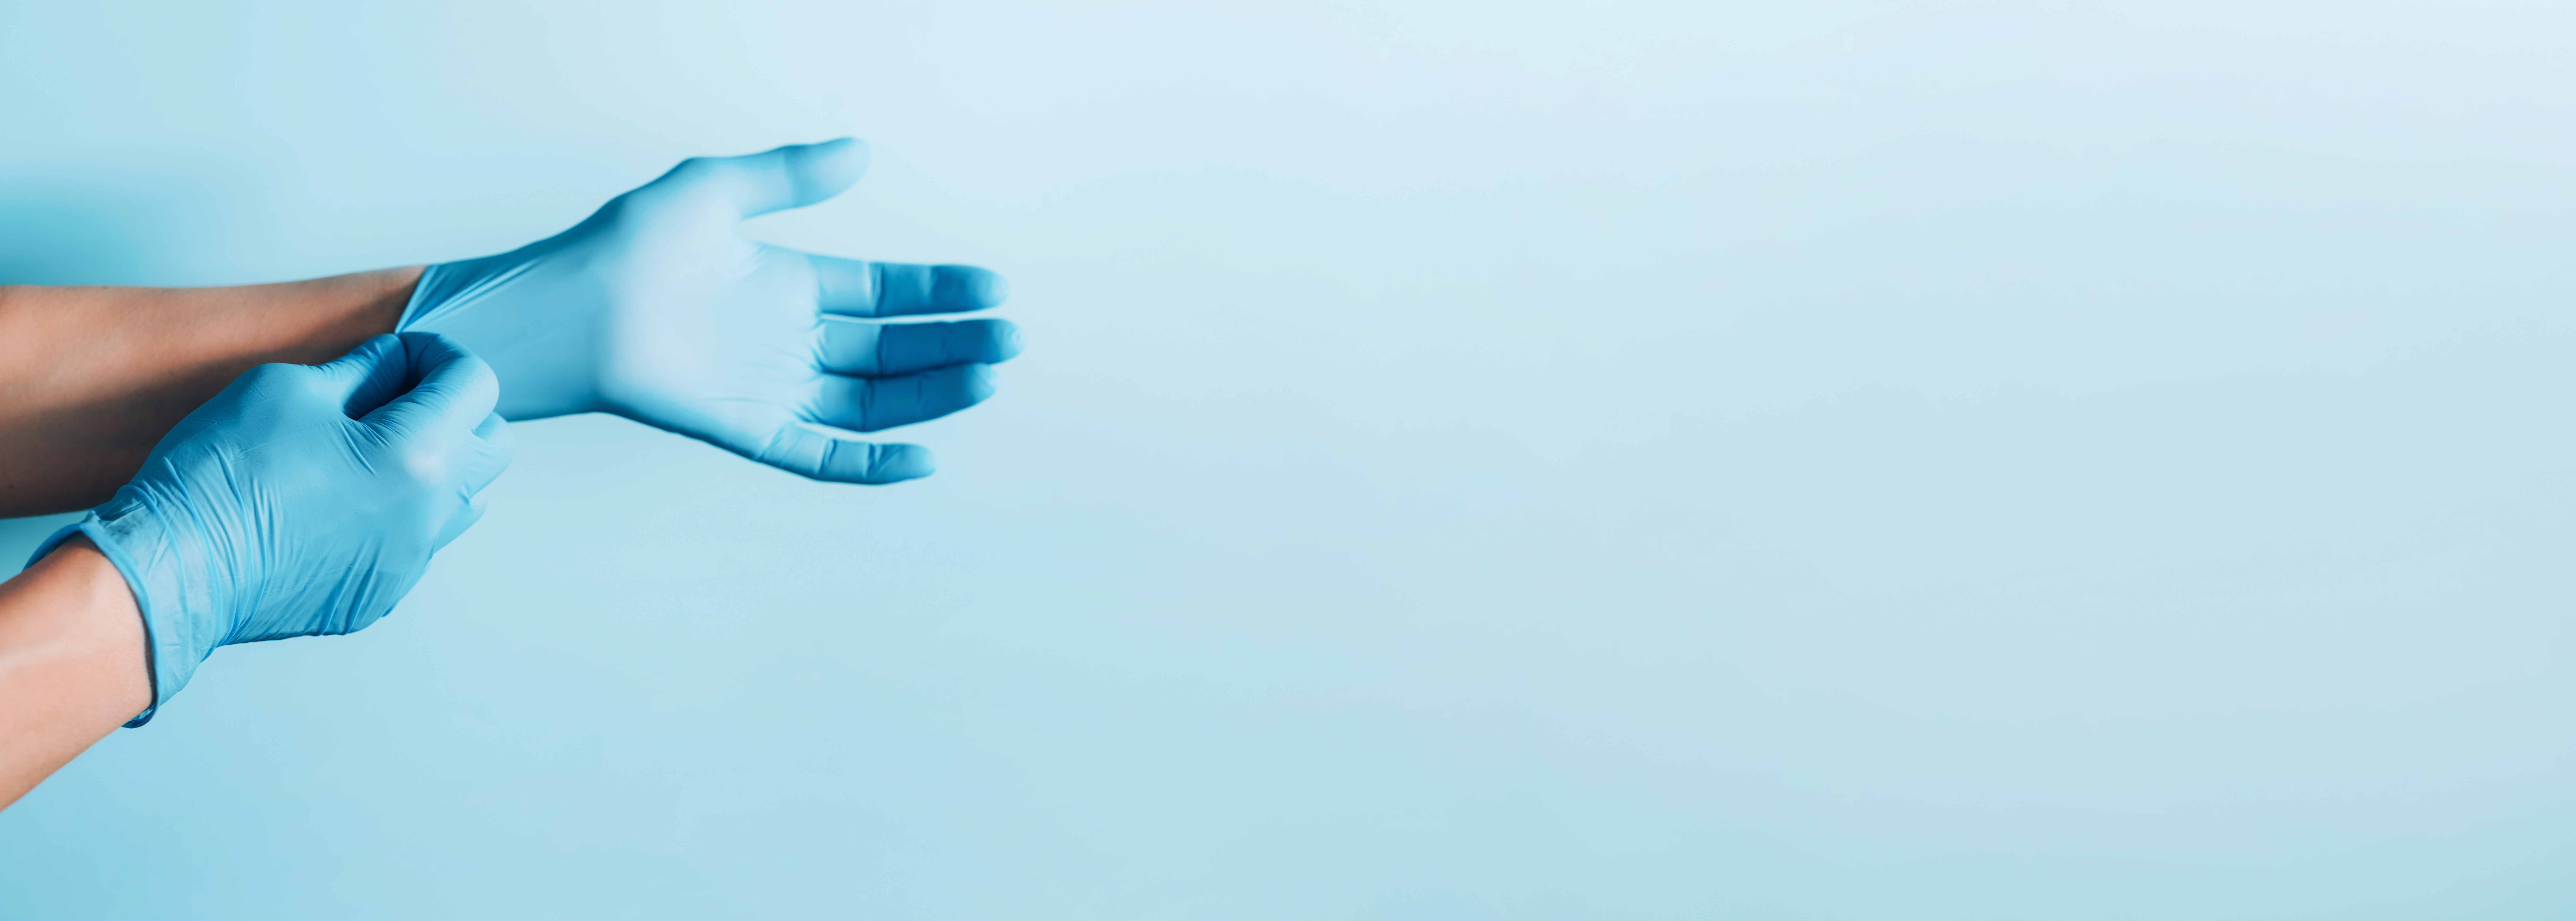 Header graphic: Medical protective equipment category - hands with medical gloves against a blue background